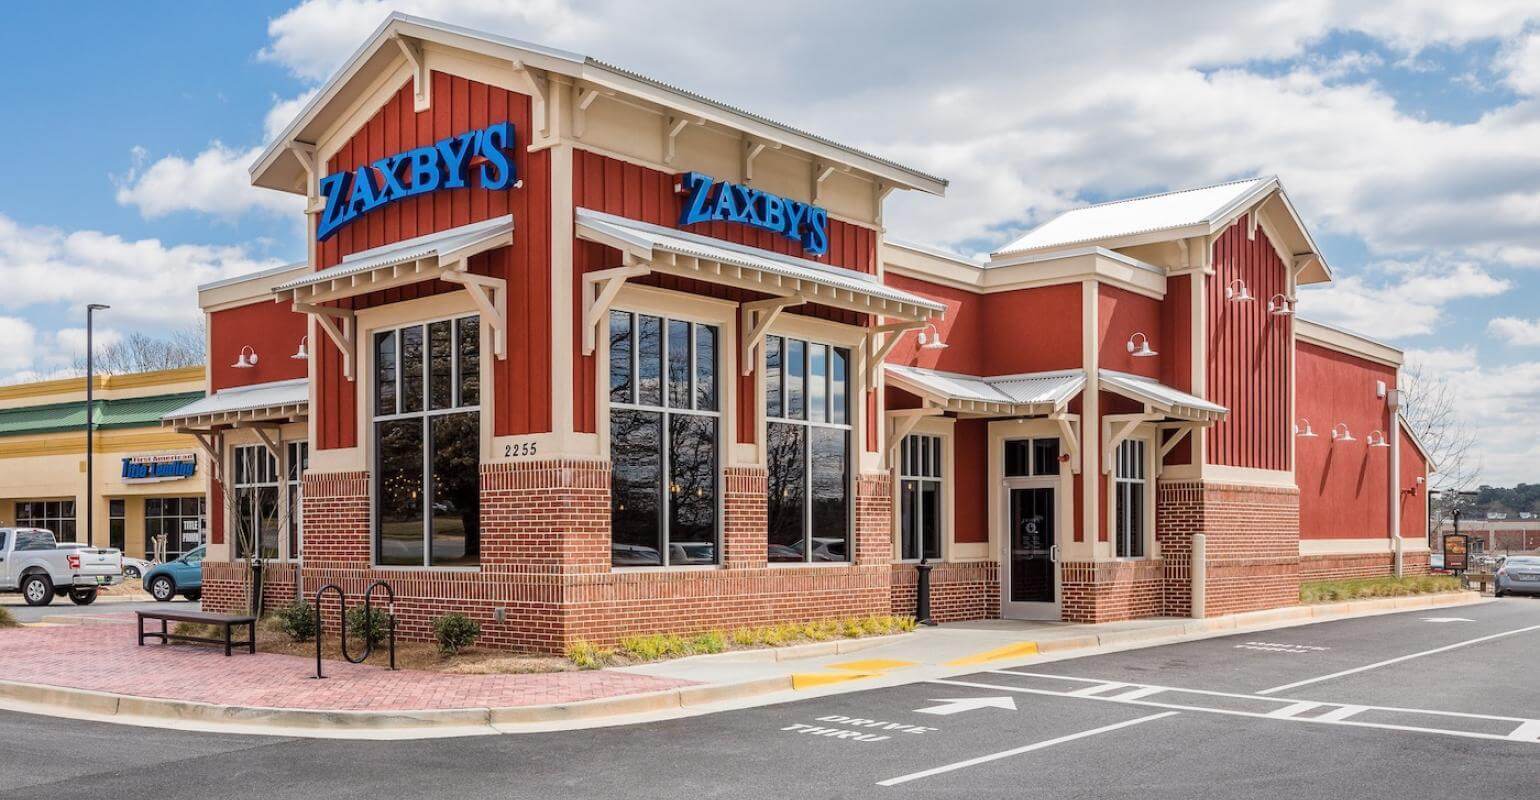 what is zaxbys